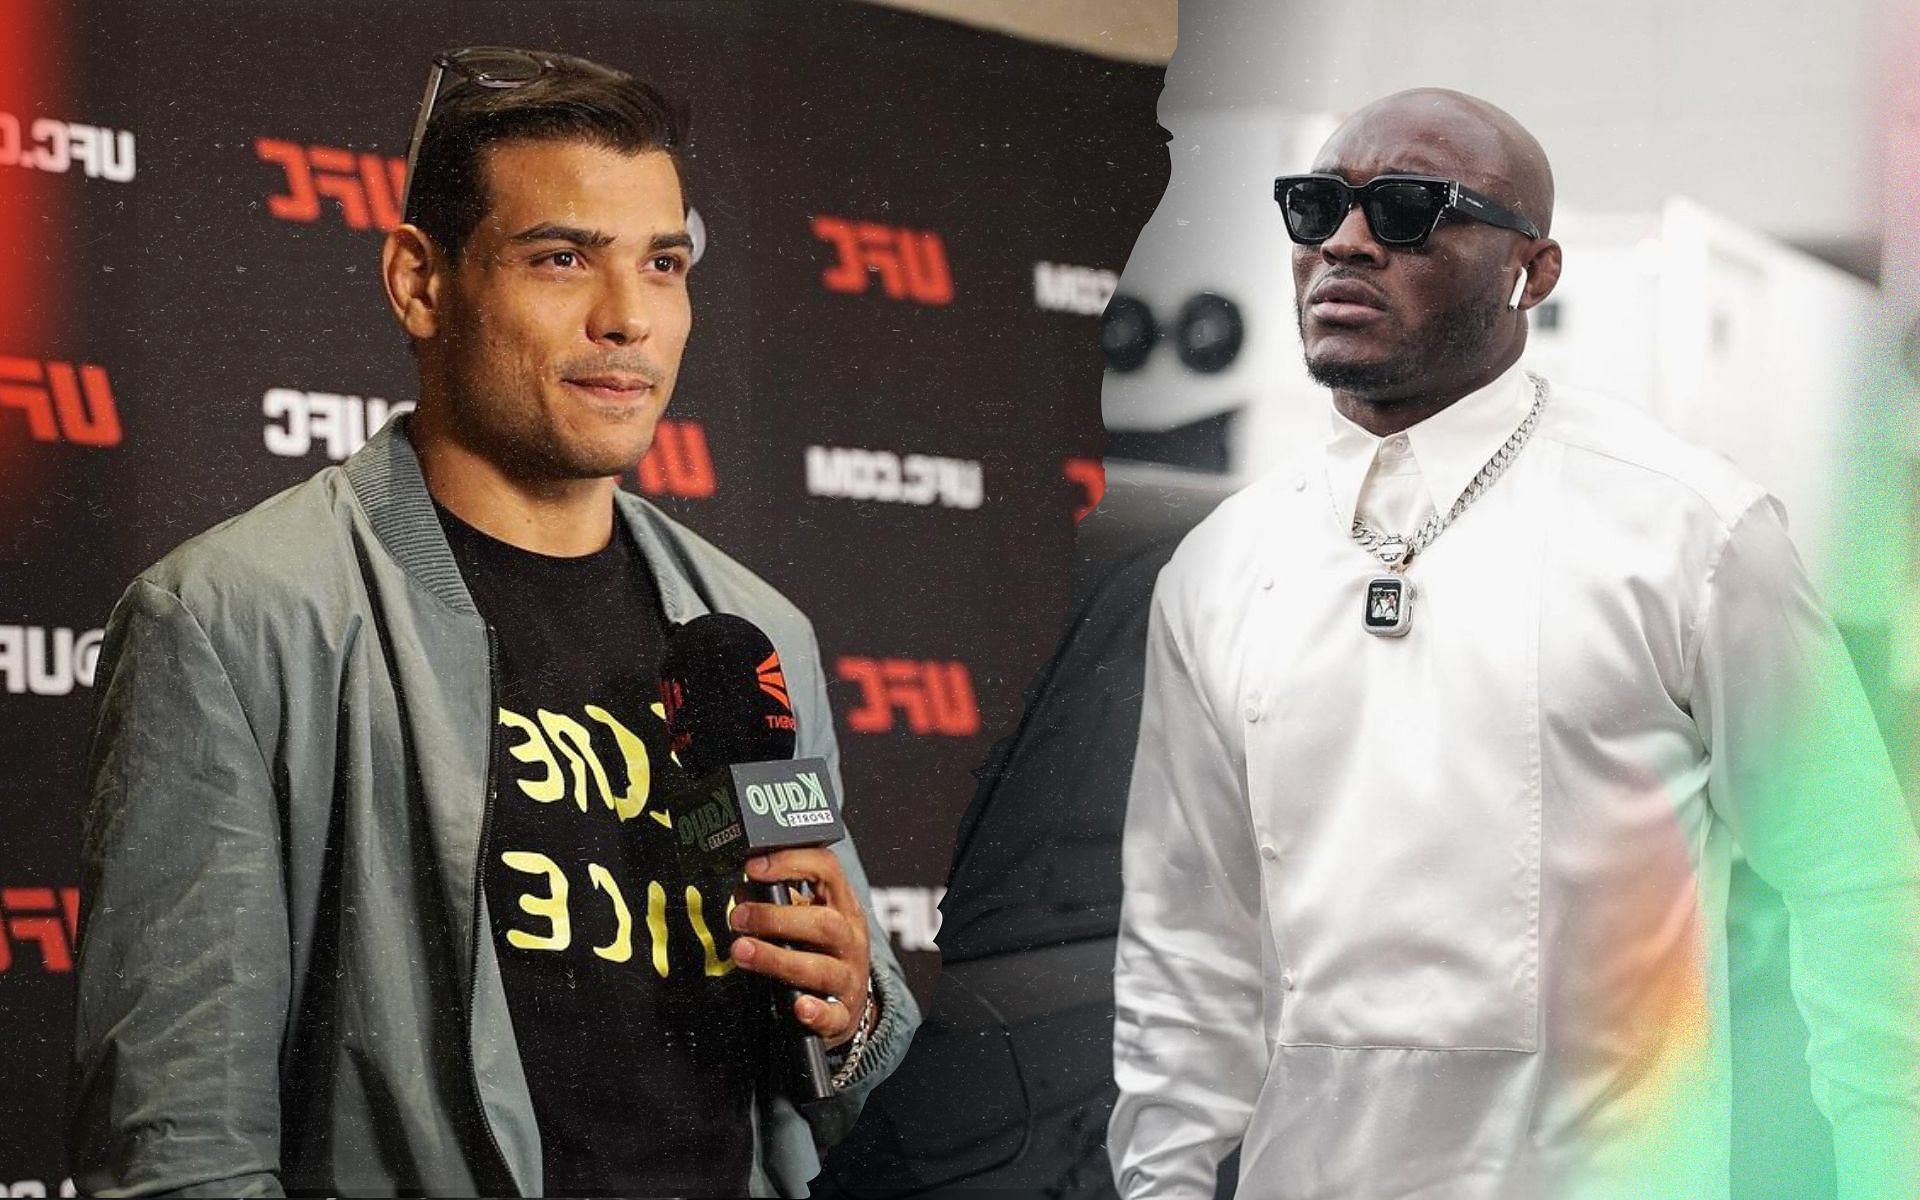 Paulo Costa (left) opens up on why he wants a fight against Kamaru Usman (right). [Image credits: @PauloCosta &amp; @KamaruUsman on Instagram]